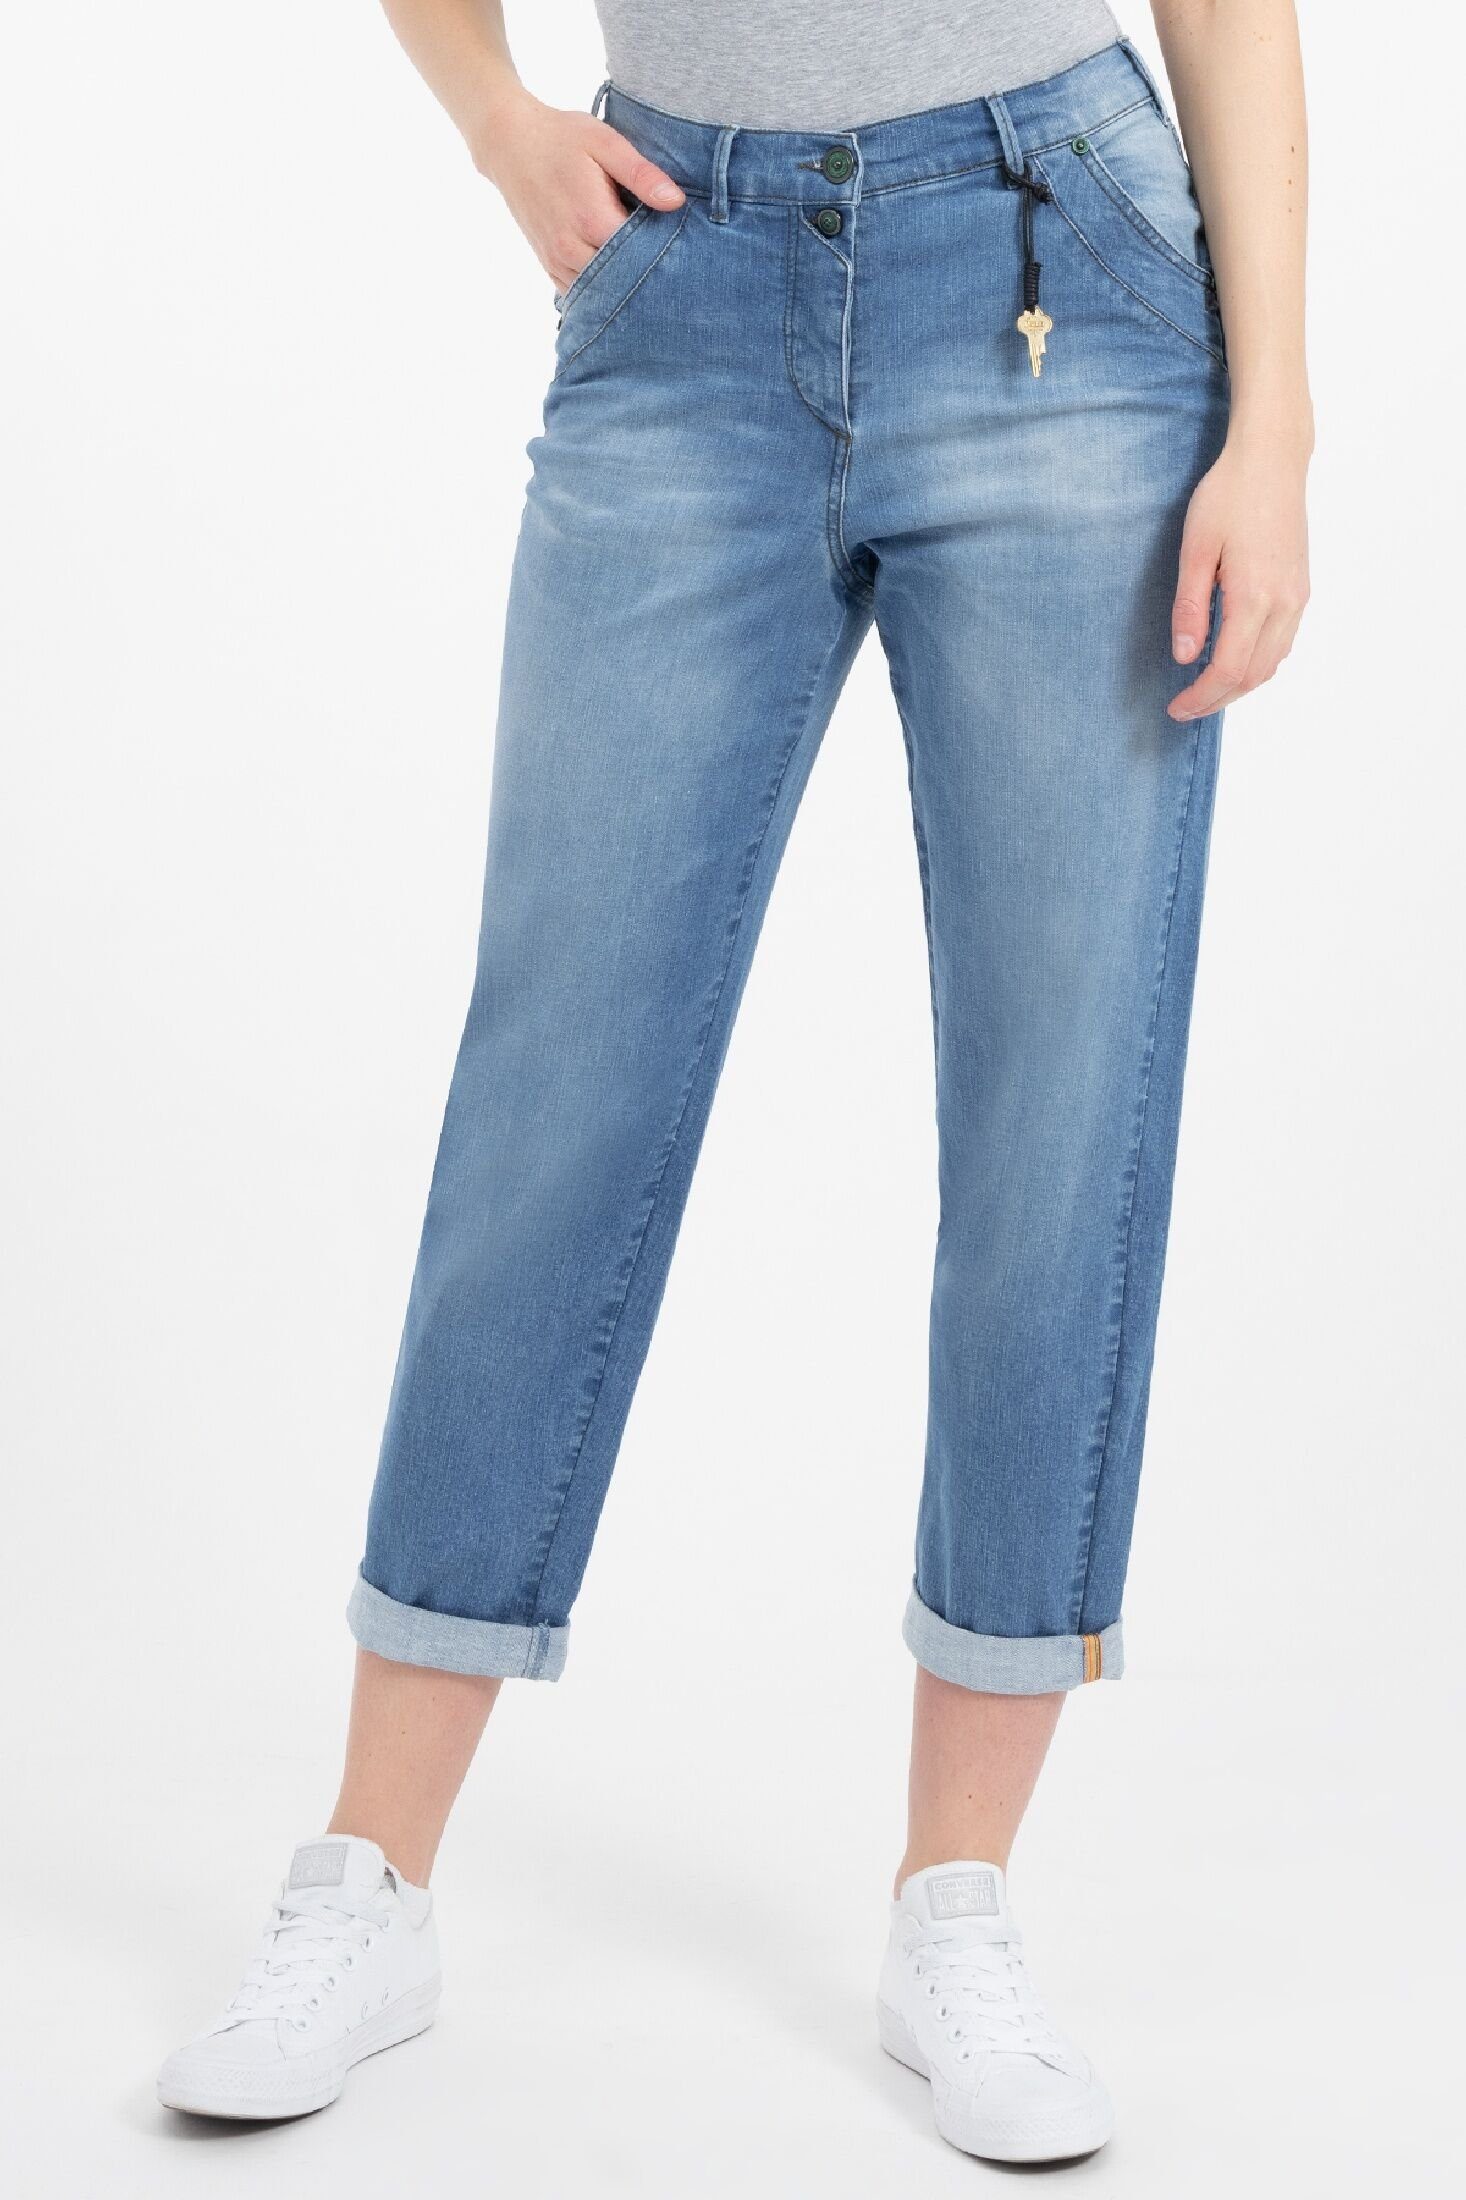 Recover Pants Relax-fit-Jeans ALLEGRA DENIM-BLUE | Loose Fit Jeans